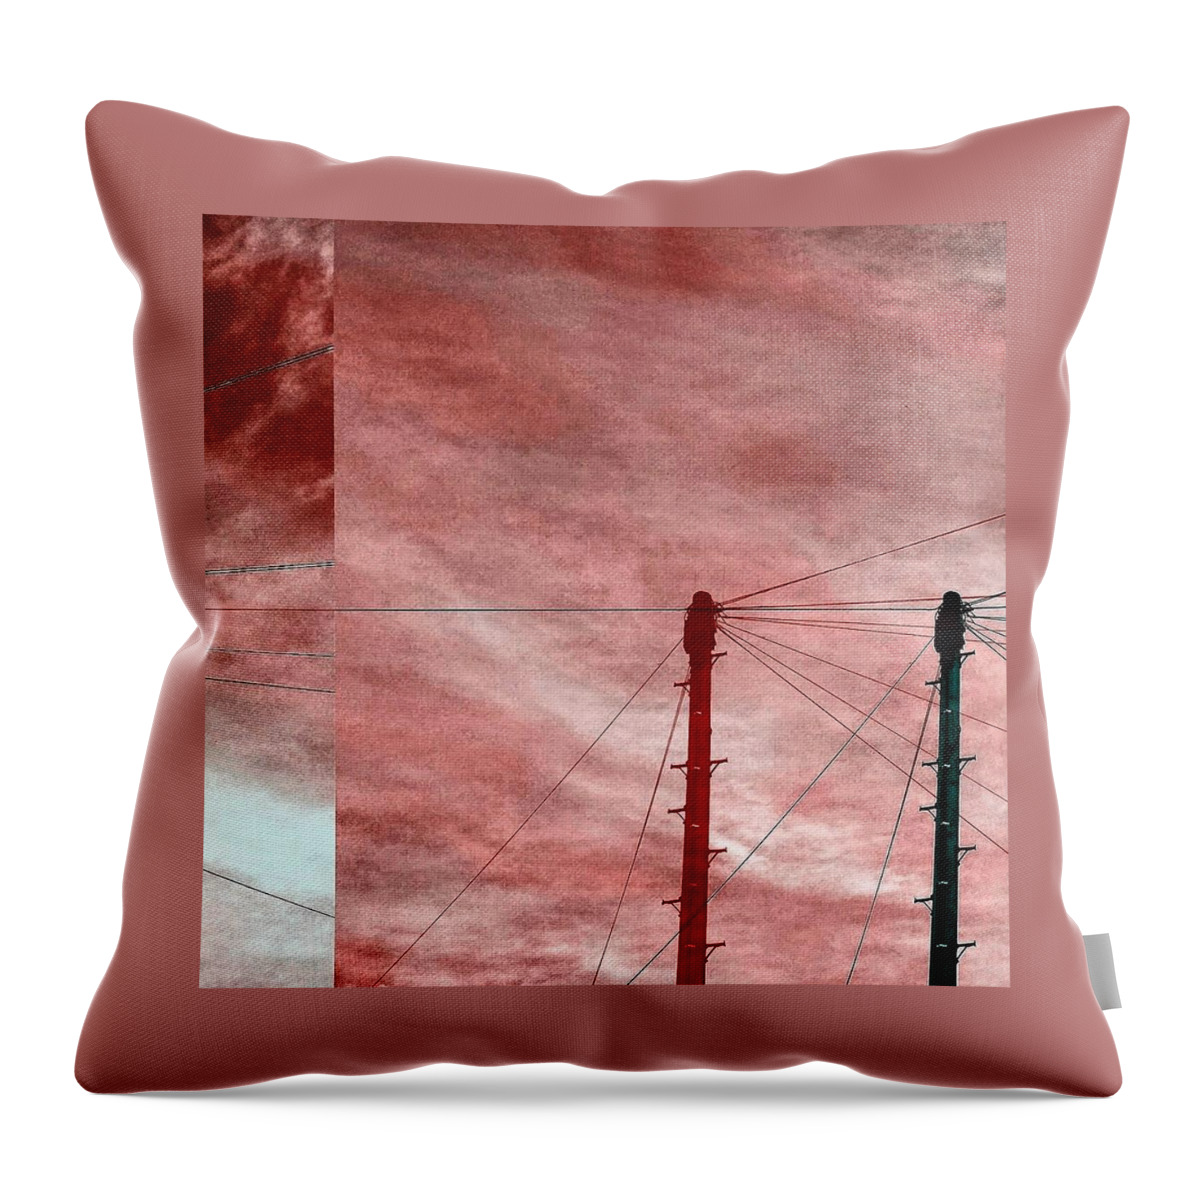 #cubism #cubist #cubistic #urban_photography #urbanphotography #androidography #not4ordinary #street #streetphotography #streetart #street_art #street_photography #streetarteverywhere Throw Pillow featuring the photograph Cubist Sky 2 by Jason Roust